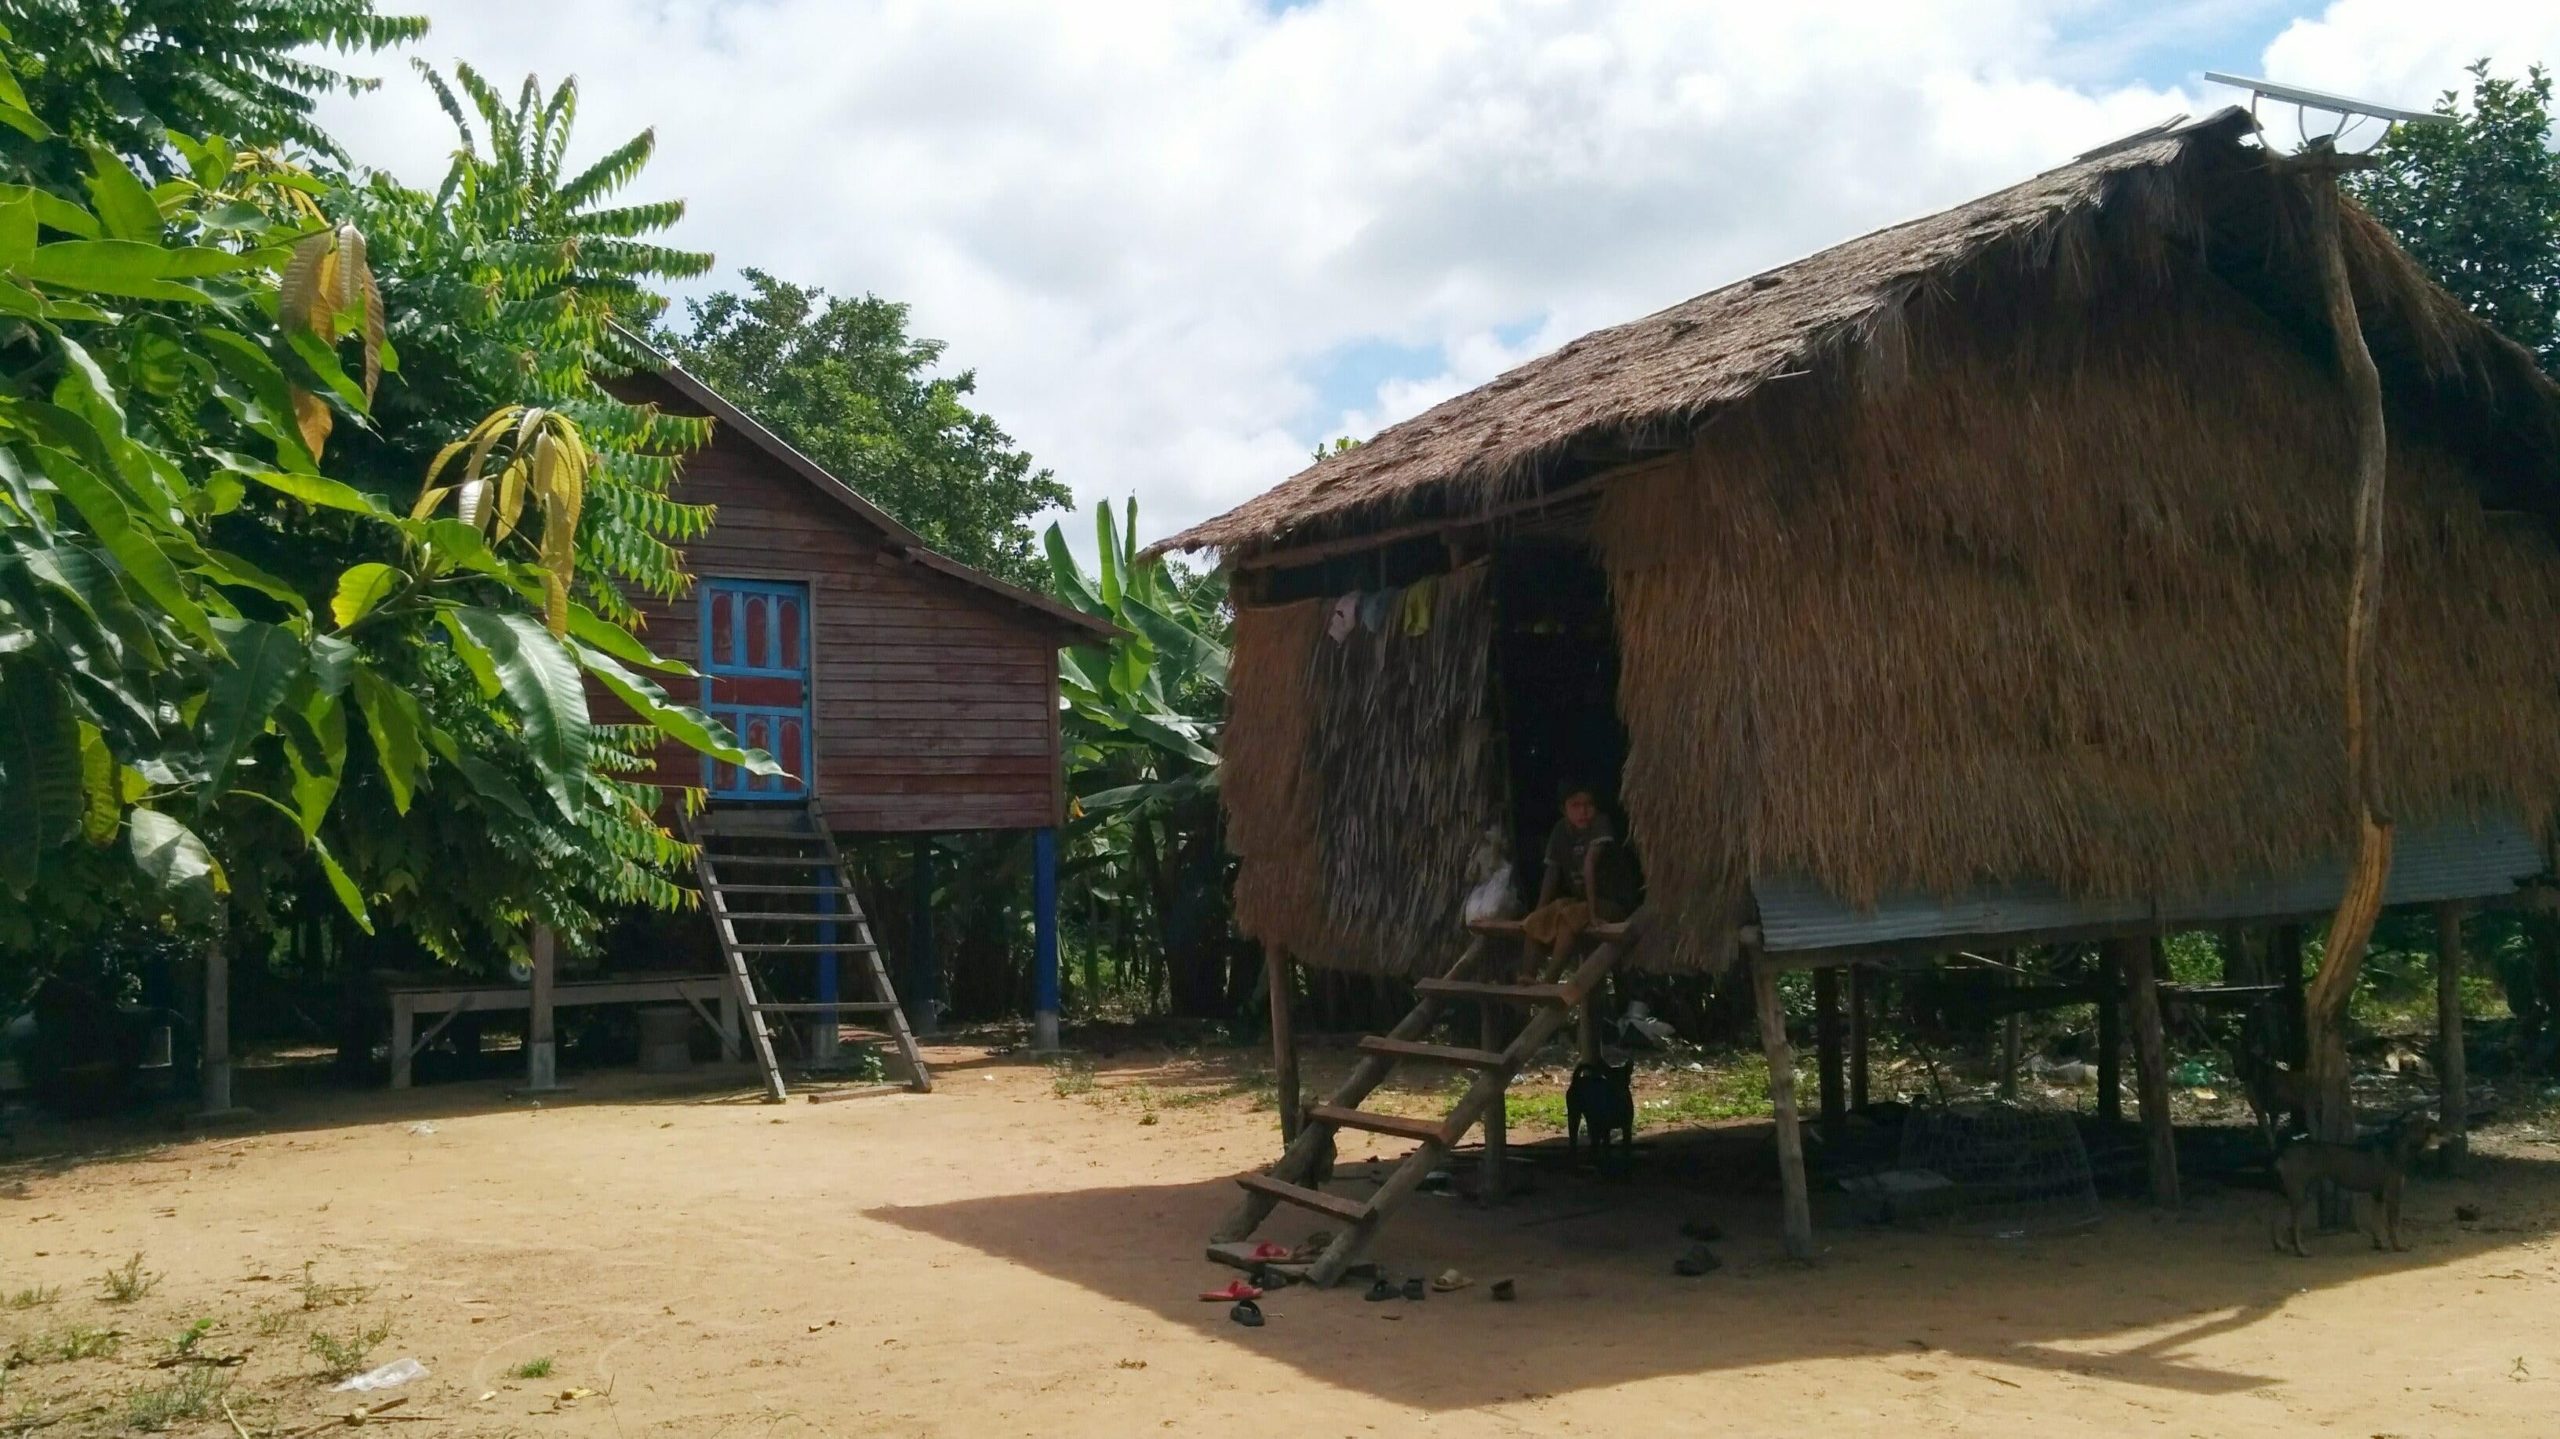 Examples of contemporary Cambodian homes. The house in the foreground is made from wood and thatch.  (Image: Alison Carter)